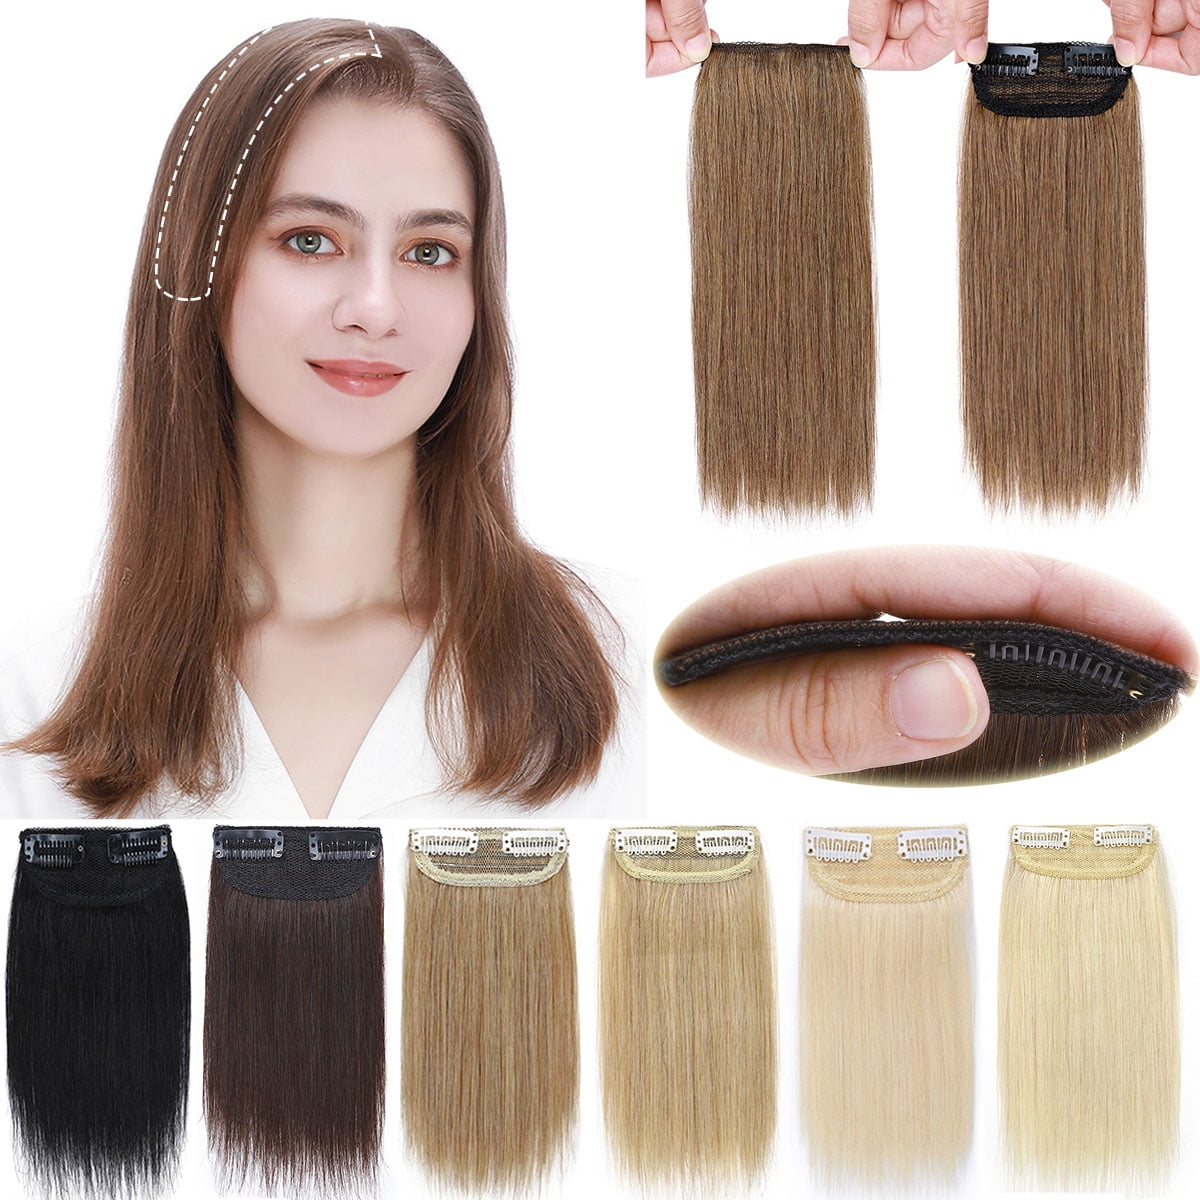 45cm / 55cm Three-piece Wig for Women Long Hair Patch Seamless Invisible  Hair Extension Big Wave Summer Curly Hair Simulation Wig Set | Lazada  Singapore